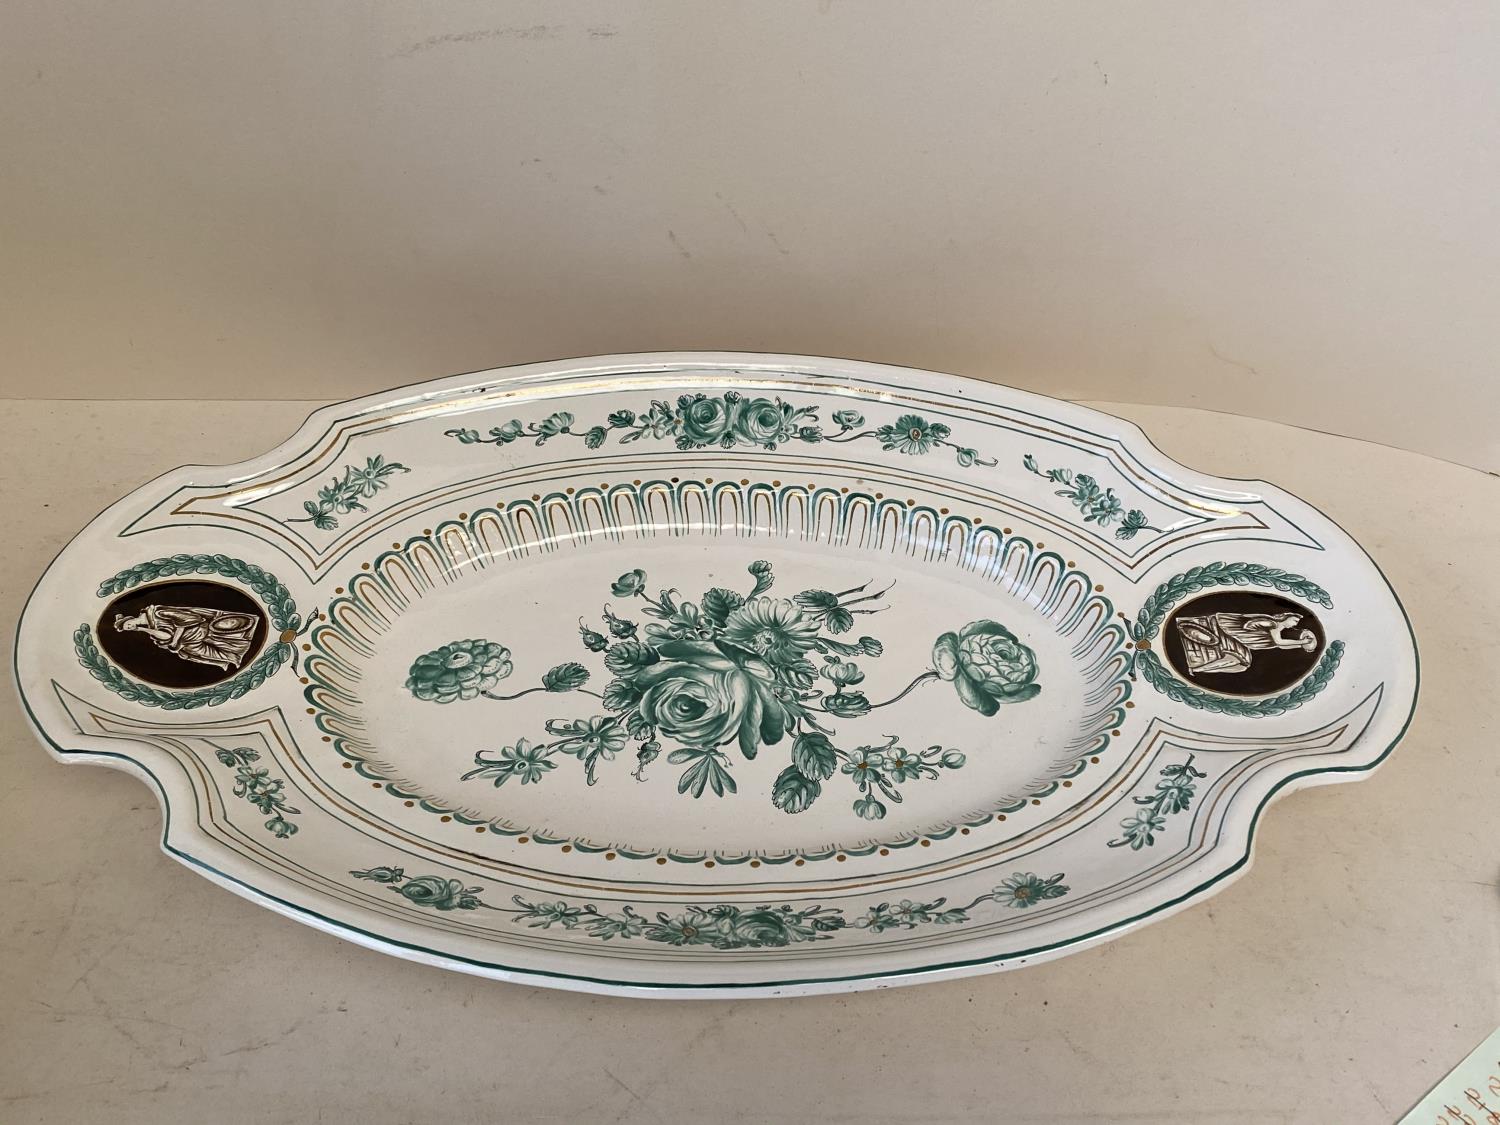 Large French early C19th French lidded tureen on a matching base by Veuve Perrin (1748-1803) - Image 4 of 8